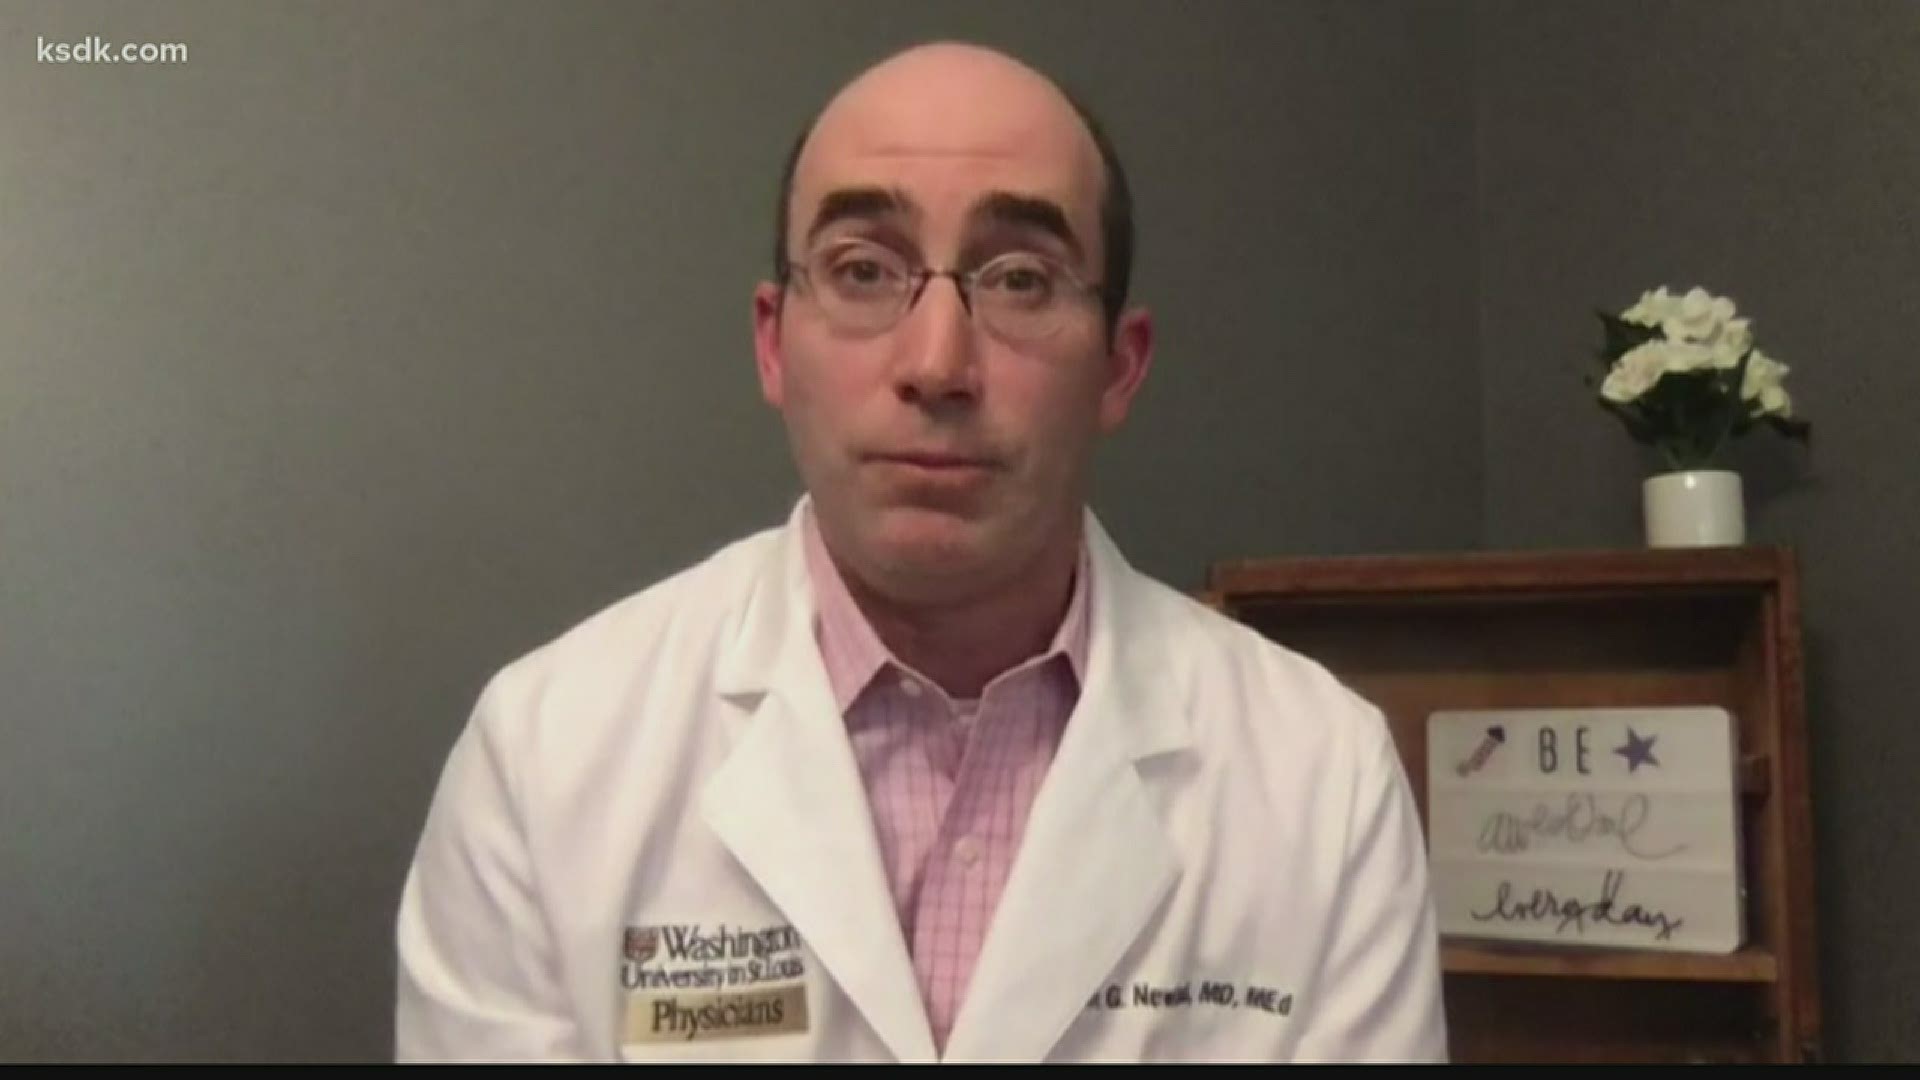 Dr. Jason Newland answers your questions including how long it takes to recover from COVID-19.